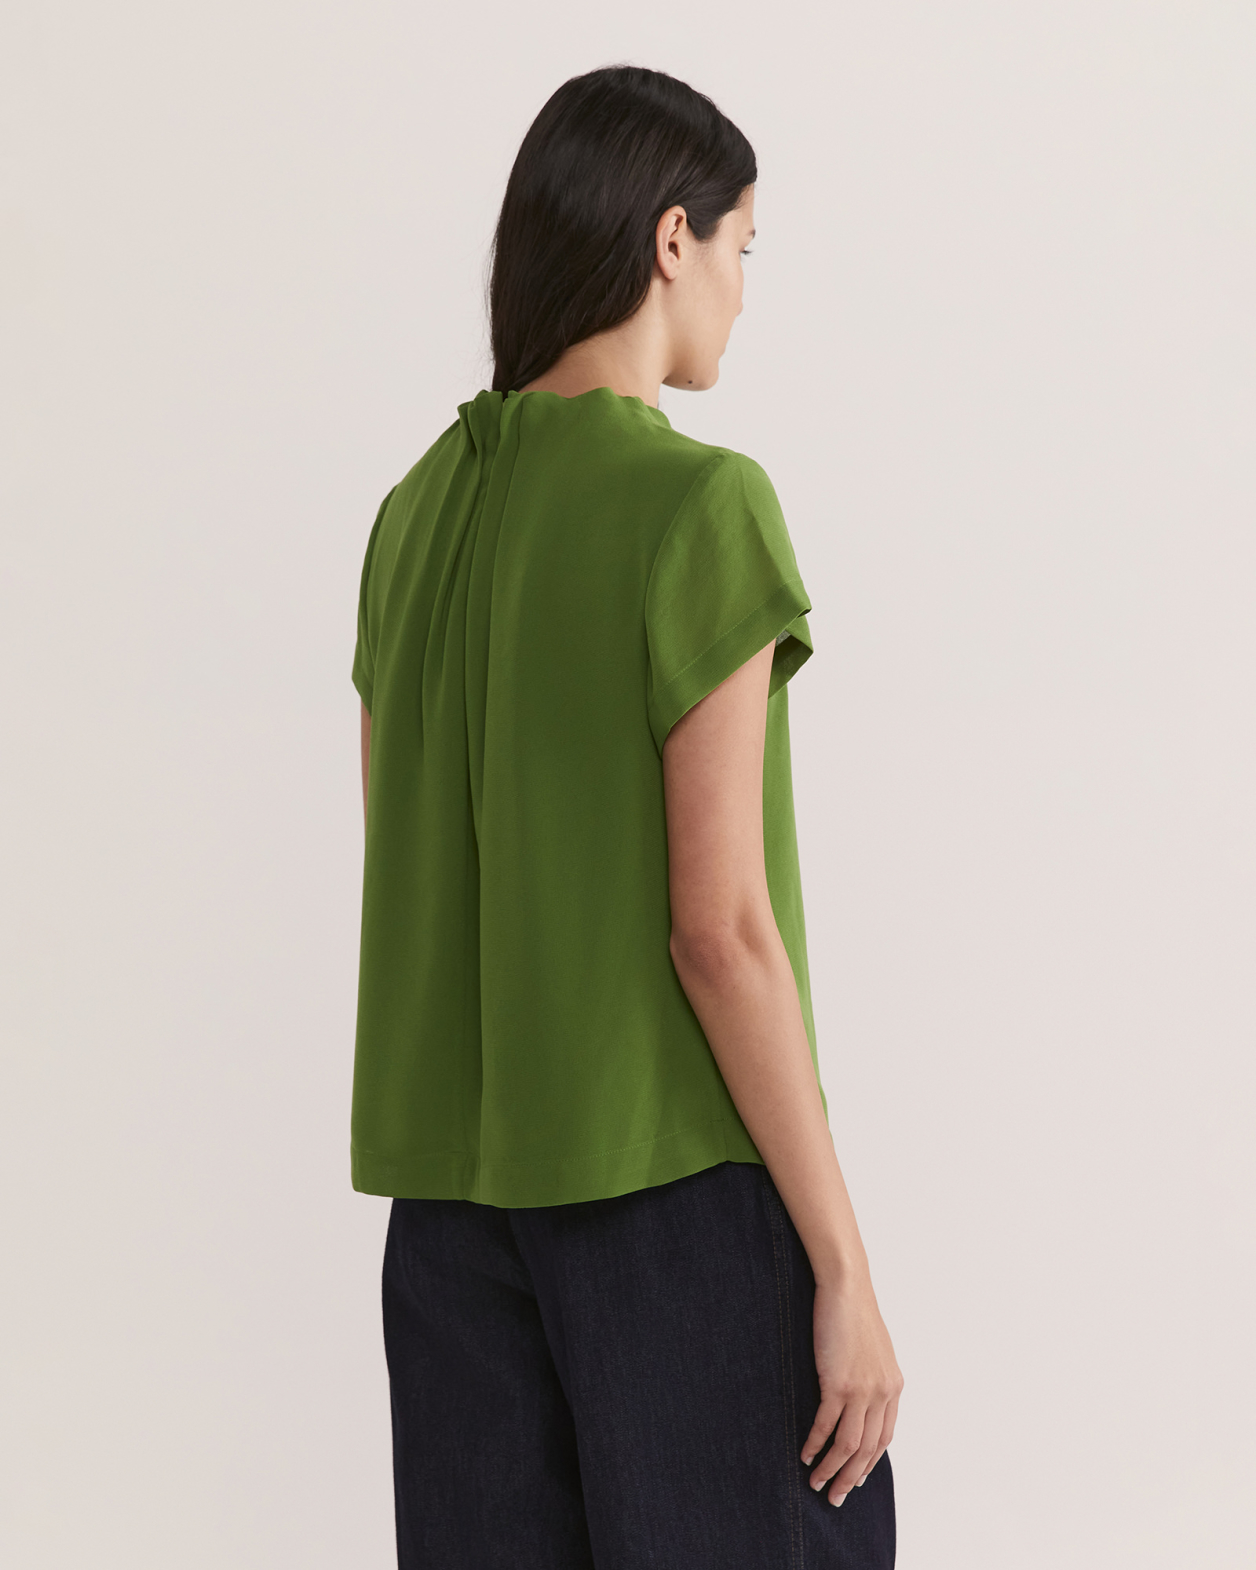 Willa High Neck Short Sleeve Top in PALM